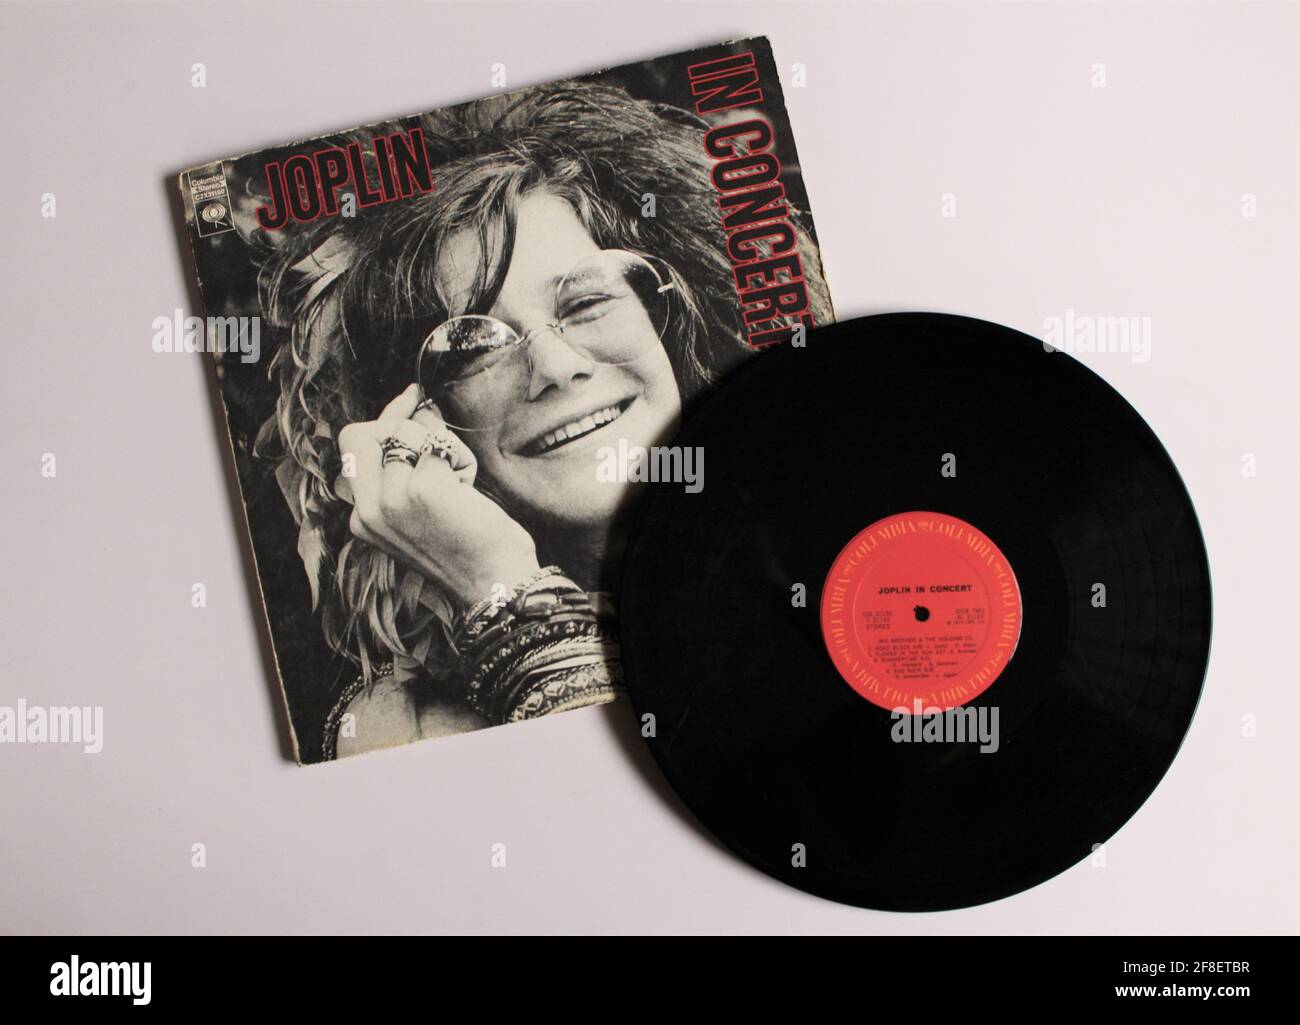 Psychedelic rock and blues artist,  Janis Joplin music album on vinyl record LP disc. Titled: In Concert album cover Stock Photo